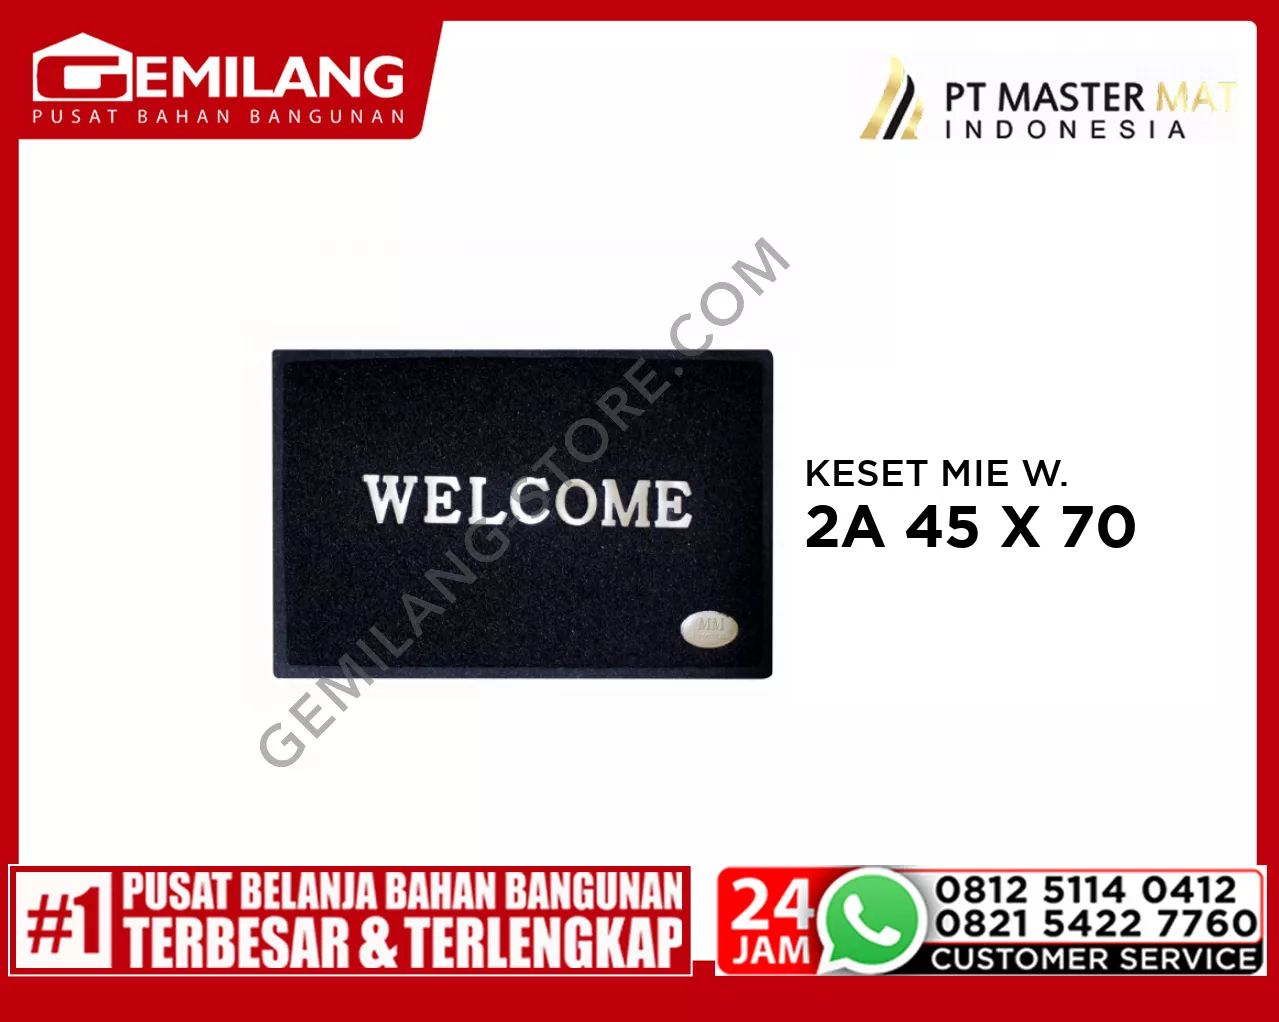 KESET MIE WELCOME 2A 45 X 70